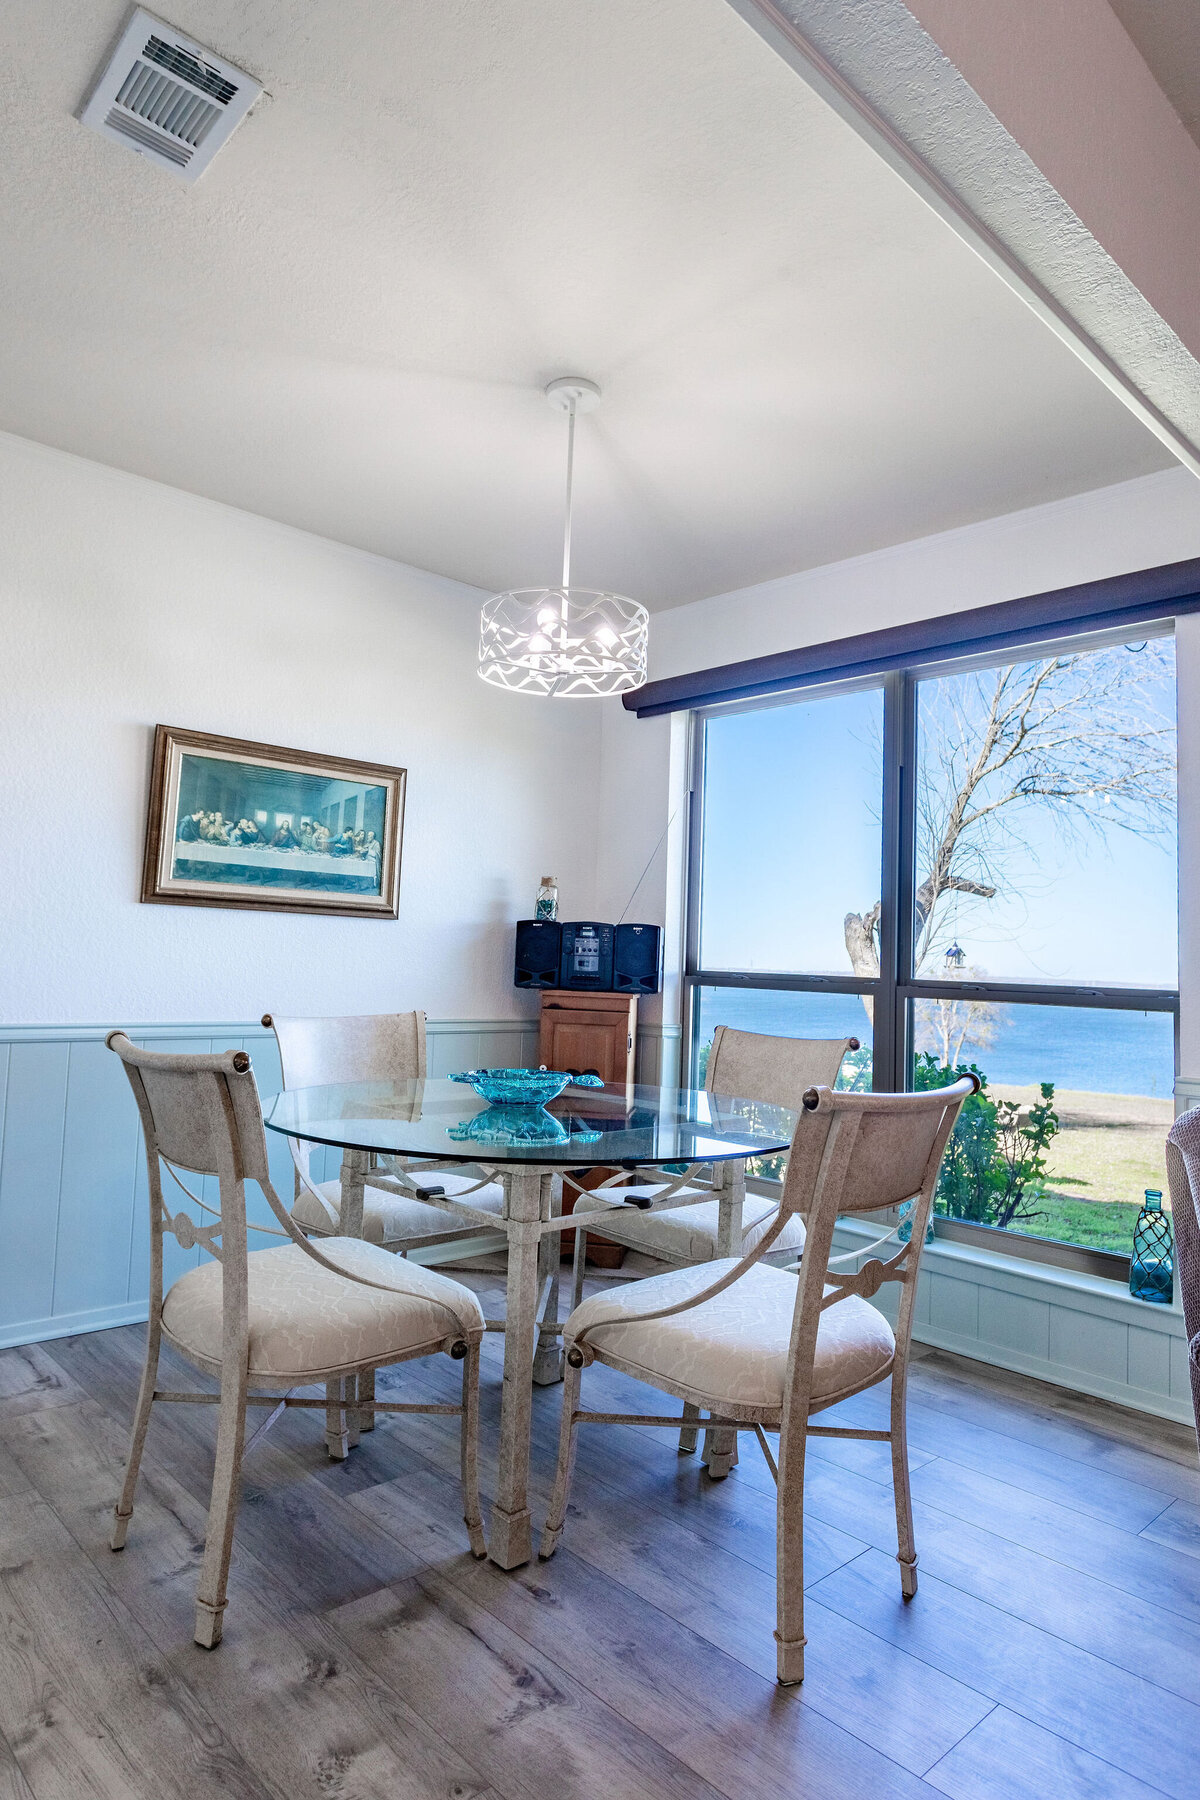 Dining room table that seats four with a beautiful view of the lake in this 2-bedroom, 2-bathroom lakeside vacation rental home for 6 guests on Tradinghouse Lake with privacy access to a fishing dock and boat launch pad, ping pong table, gazebo, free wifi and free parking in Waco, TX.